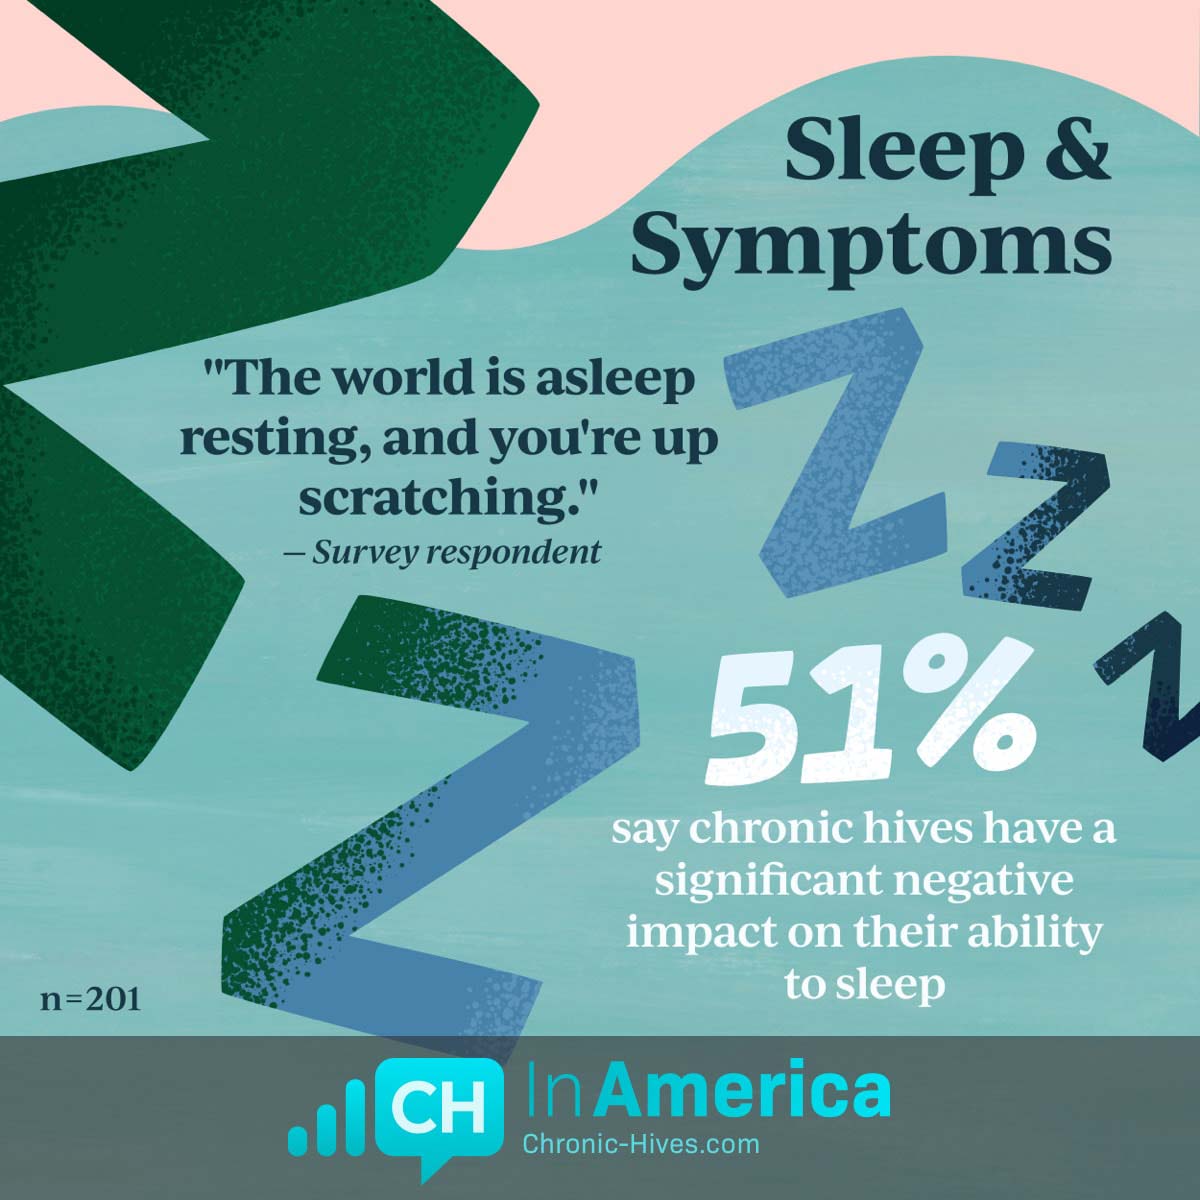 51% say chronic hives have a significant negative impact on their ability to sleep.